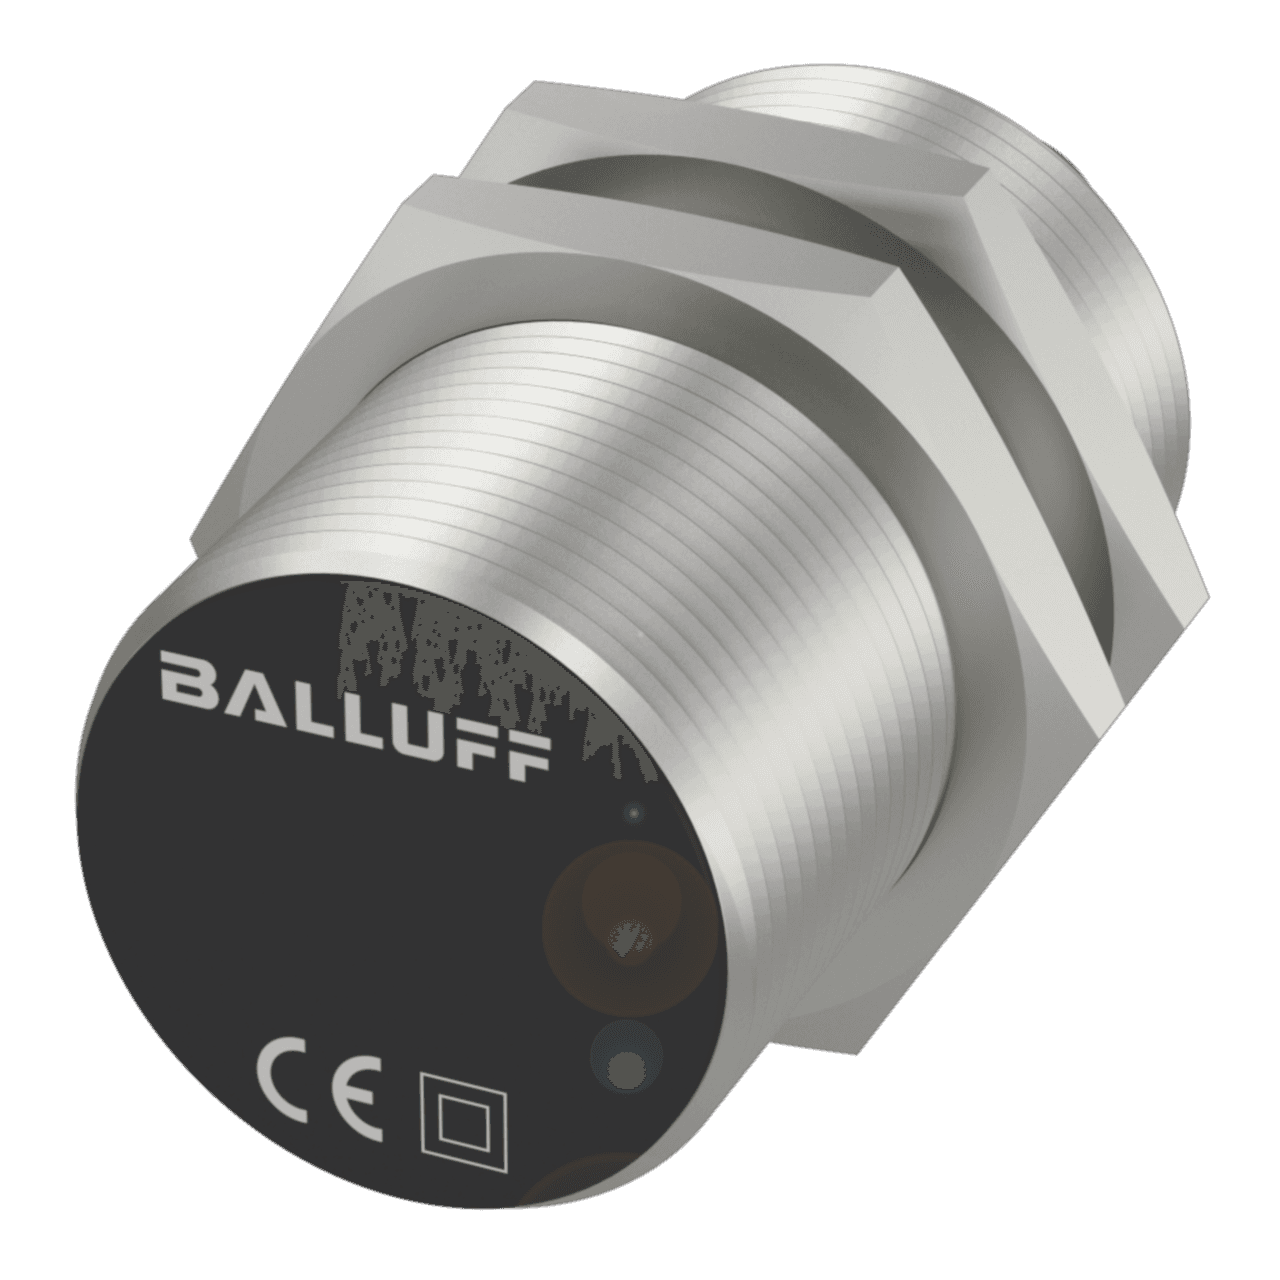 Balluff BES00A3 Inductive standard sensors with preferred type, Dimension: Ø 30 x 65 mm, Style: M30x1.5, Installation: for flush mounting, Range: 10 mm, Switching output: PNP Normally open (NO), Switching frequency: 400 Hz, Housing material: Brass, nickel plated